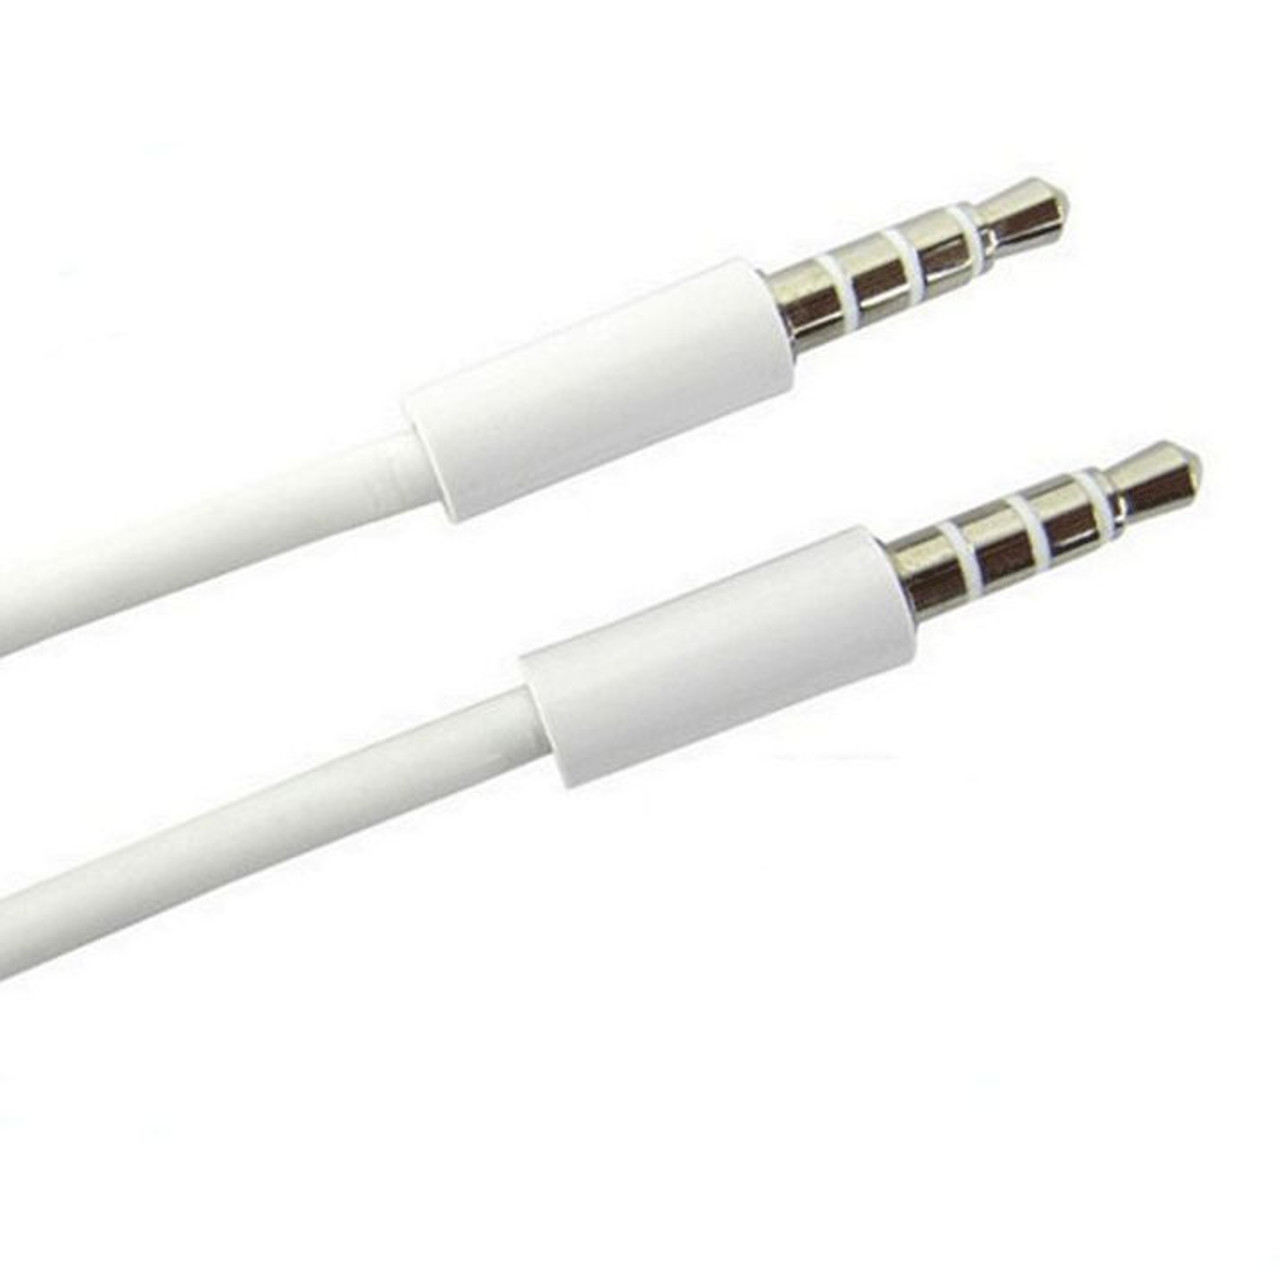 3.5mm Audio M/M Cable Line-In /AUX 4-Pole Male to Male Cord For iPhone iPad iPod Mobile Phone Tablet PC Computer Laptop Notebook Macbook